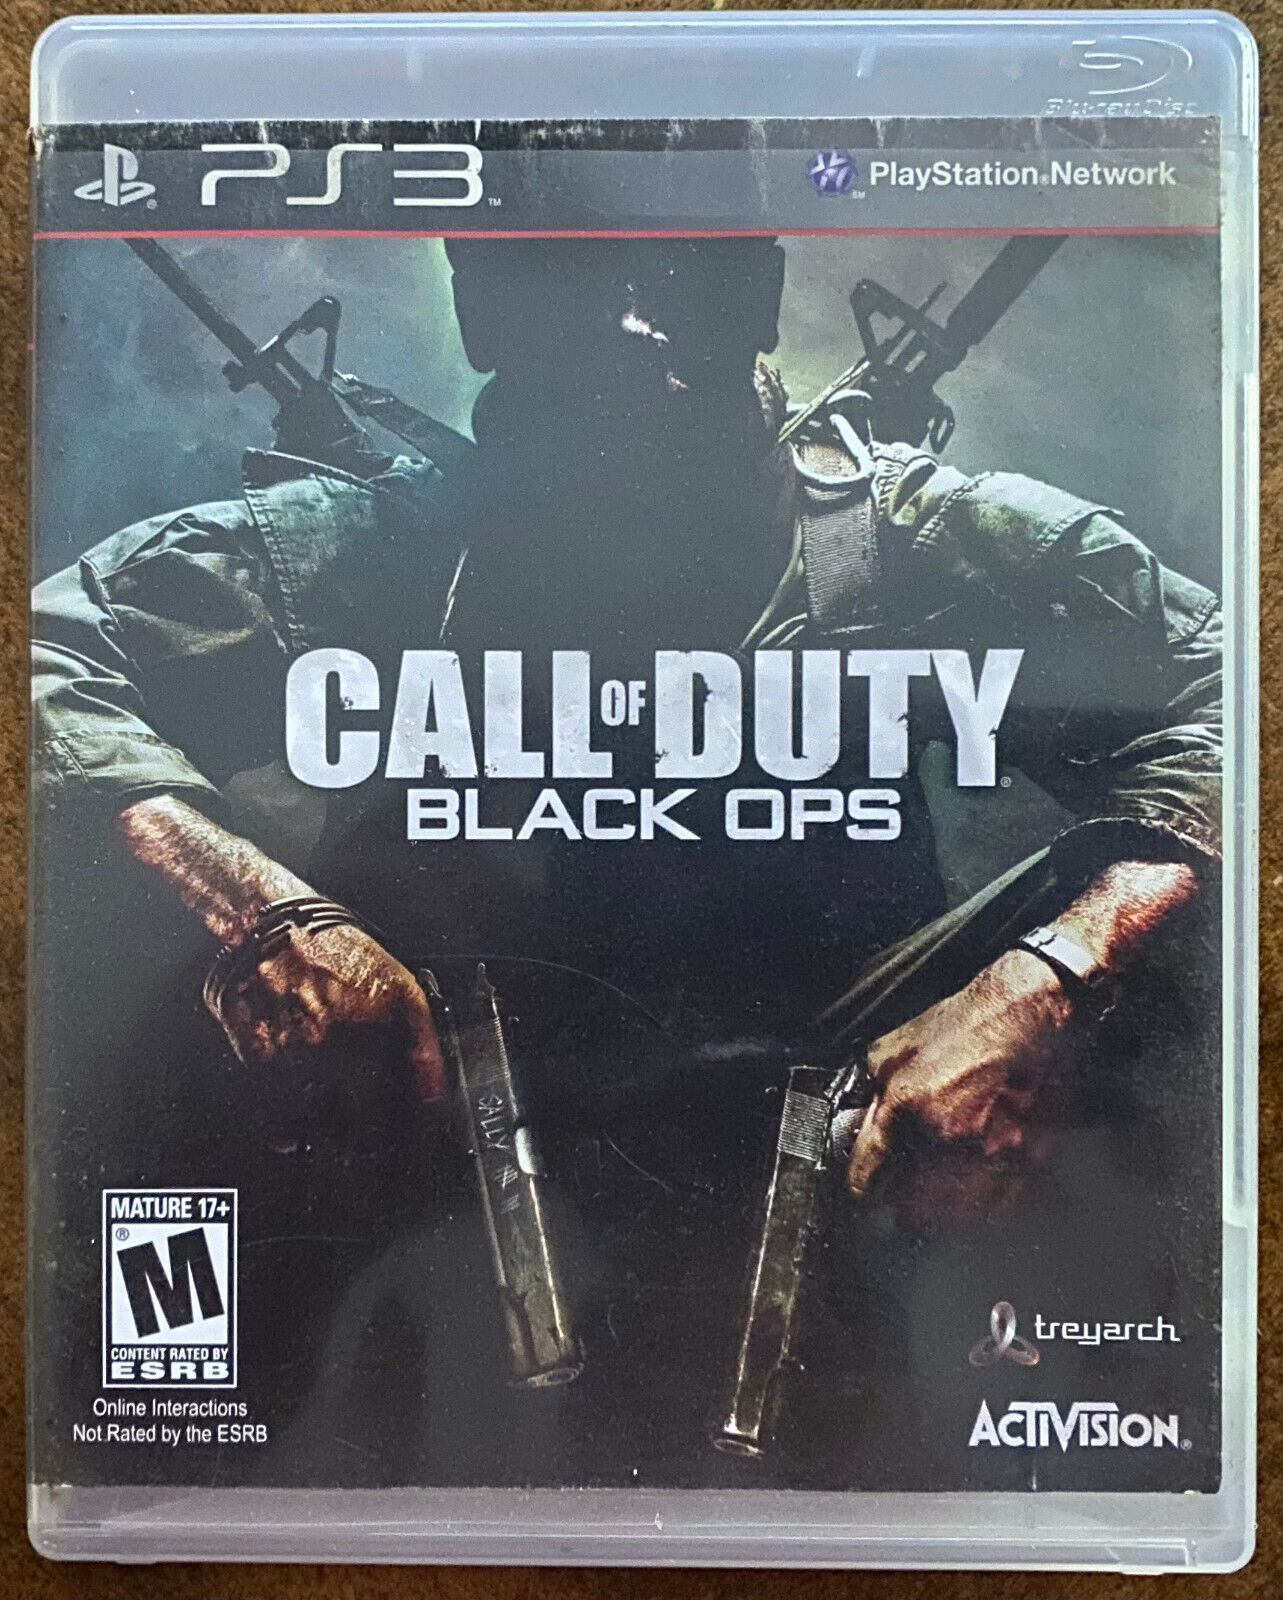 inrichting Zuidoost Jood Call of Duty: Black Ops Playstation 3 PS3 Game (Cleaned & Sanitized)  45496742096 | eBay